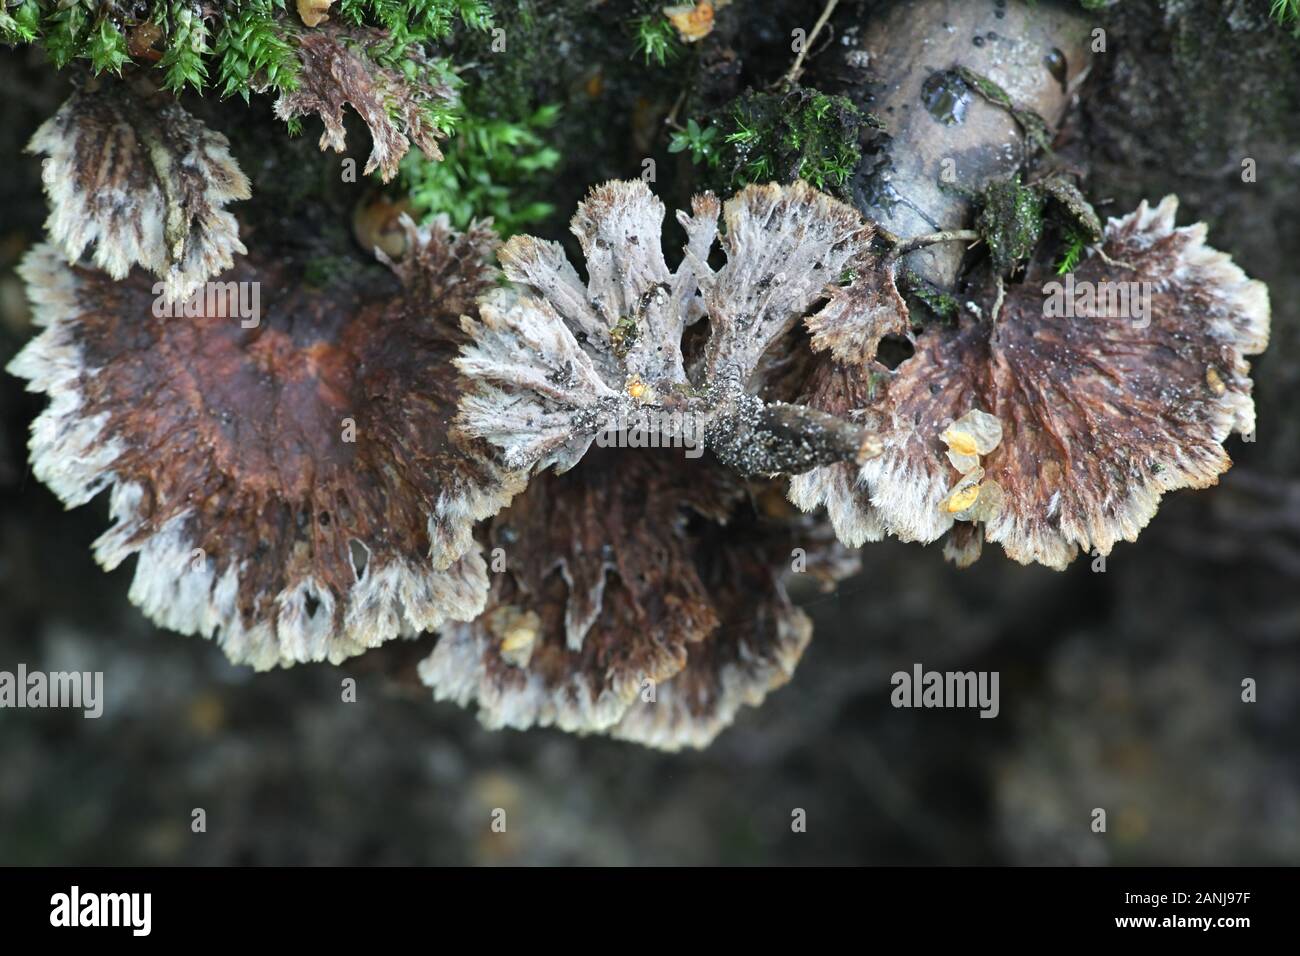 Thelephora terrestris, known as the Earthfan fungus, mushrooms from Finland Stock Photo